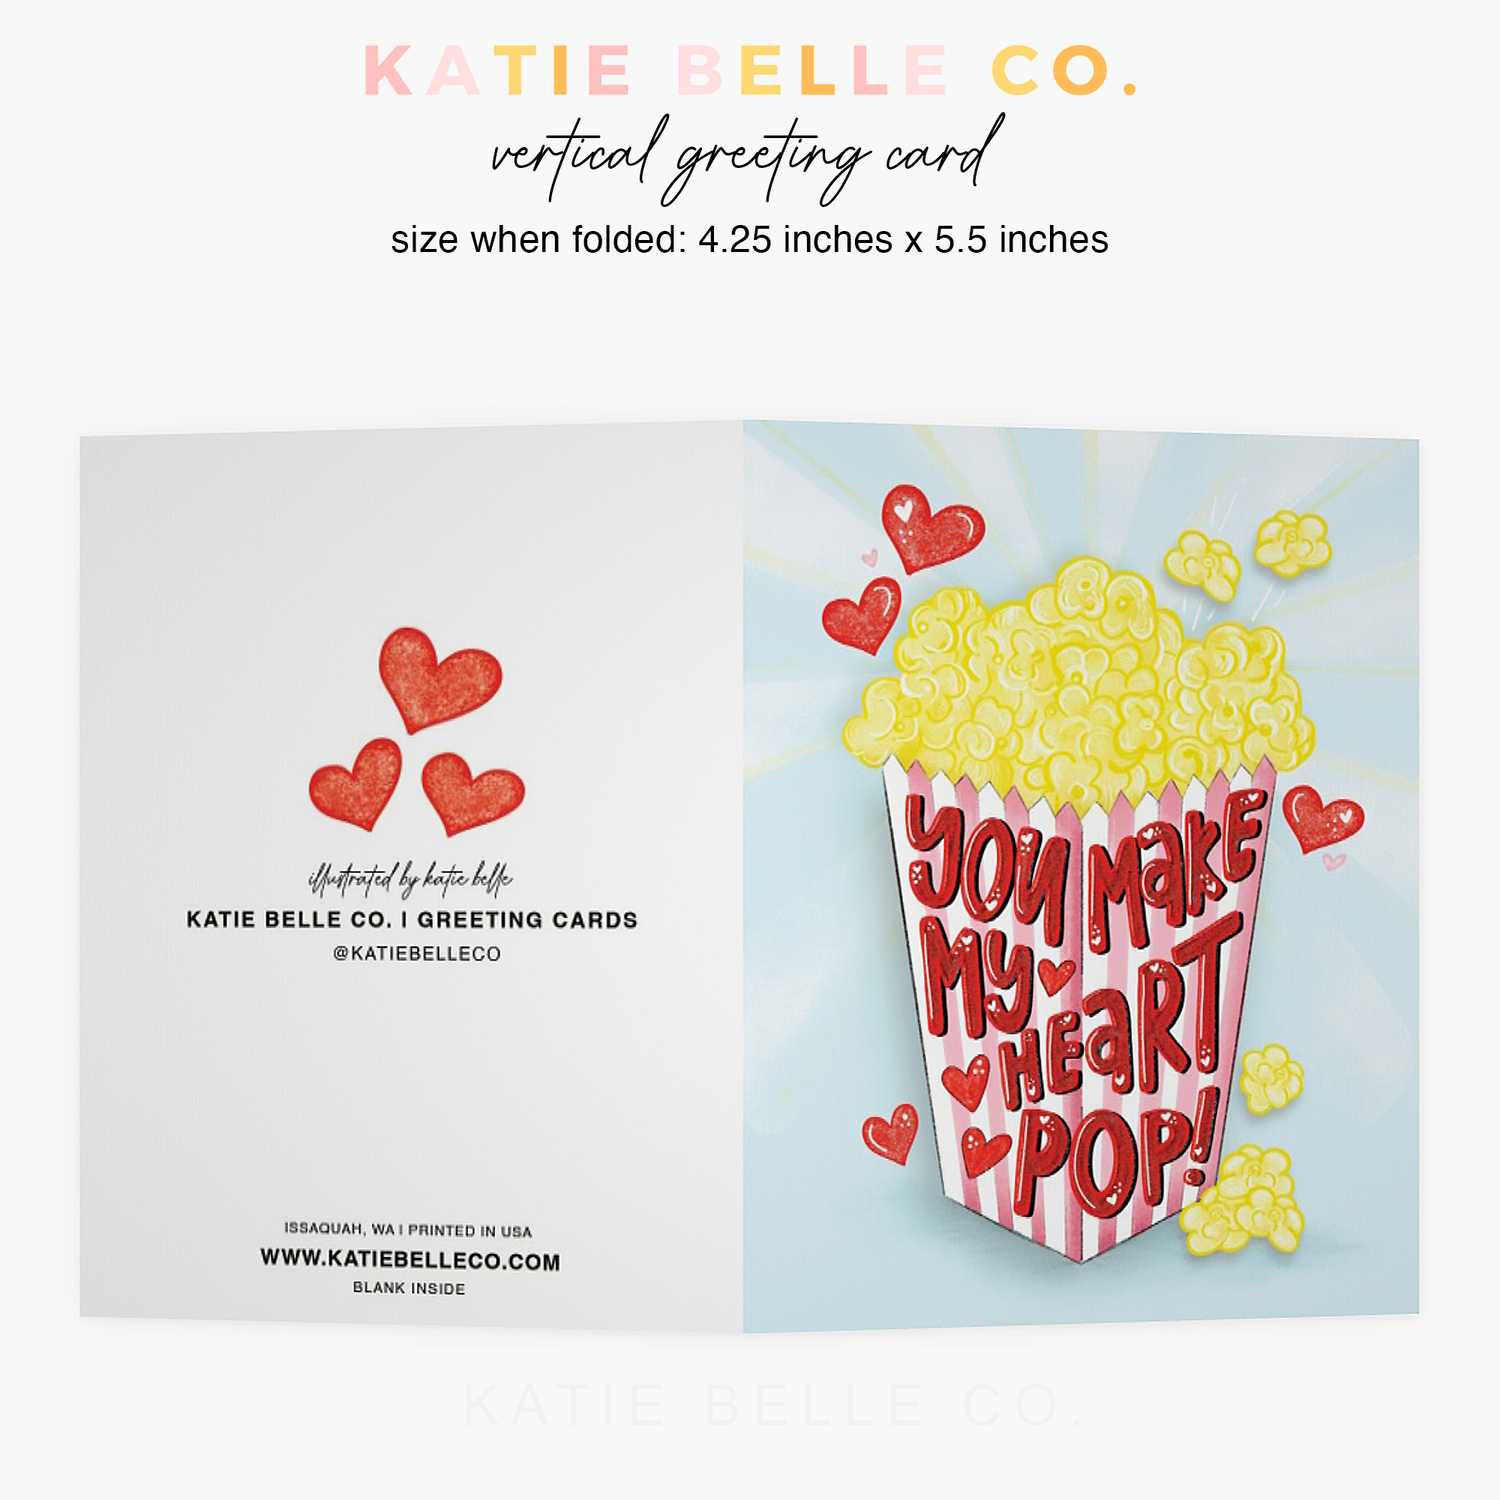 you make my heart pop. Popcorn card. greeting card. red floating hearts. popcorn bag. pink stripes. anniversary card. love greeting card. Valentine's day card. Popcorn lover gift. Katie Belle Co. Vertical greeting Card. A2 size. 